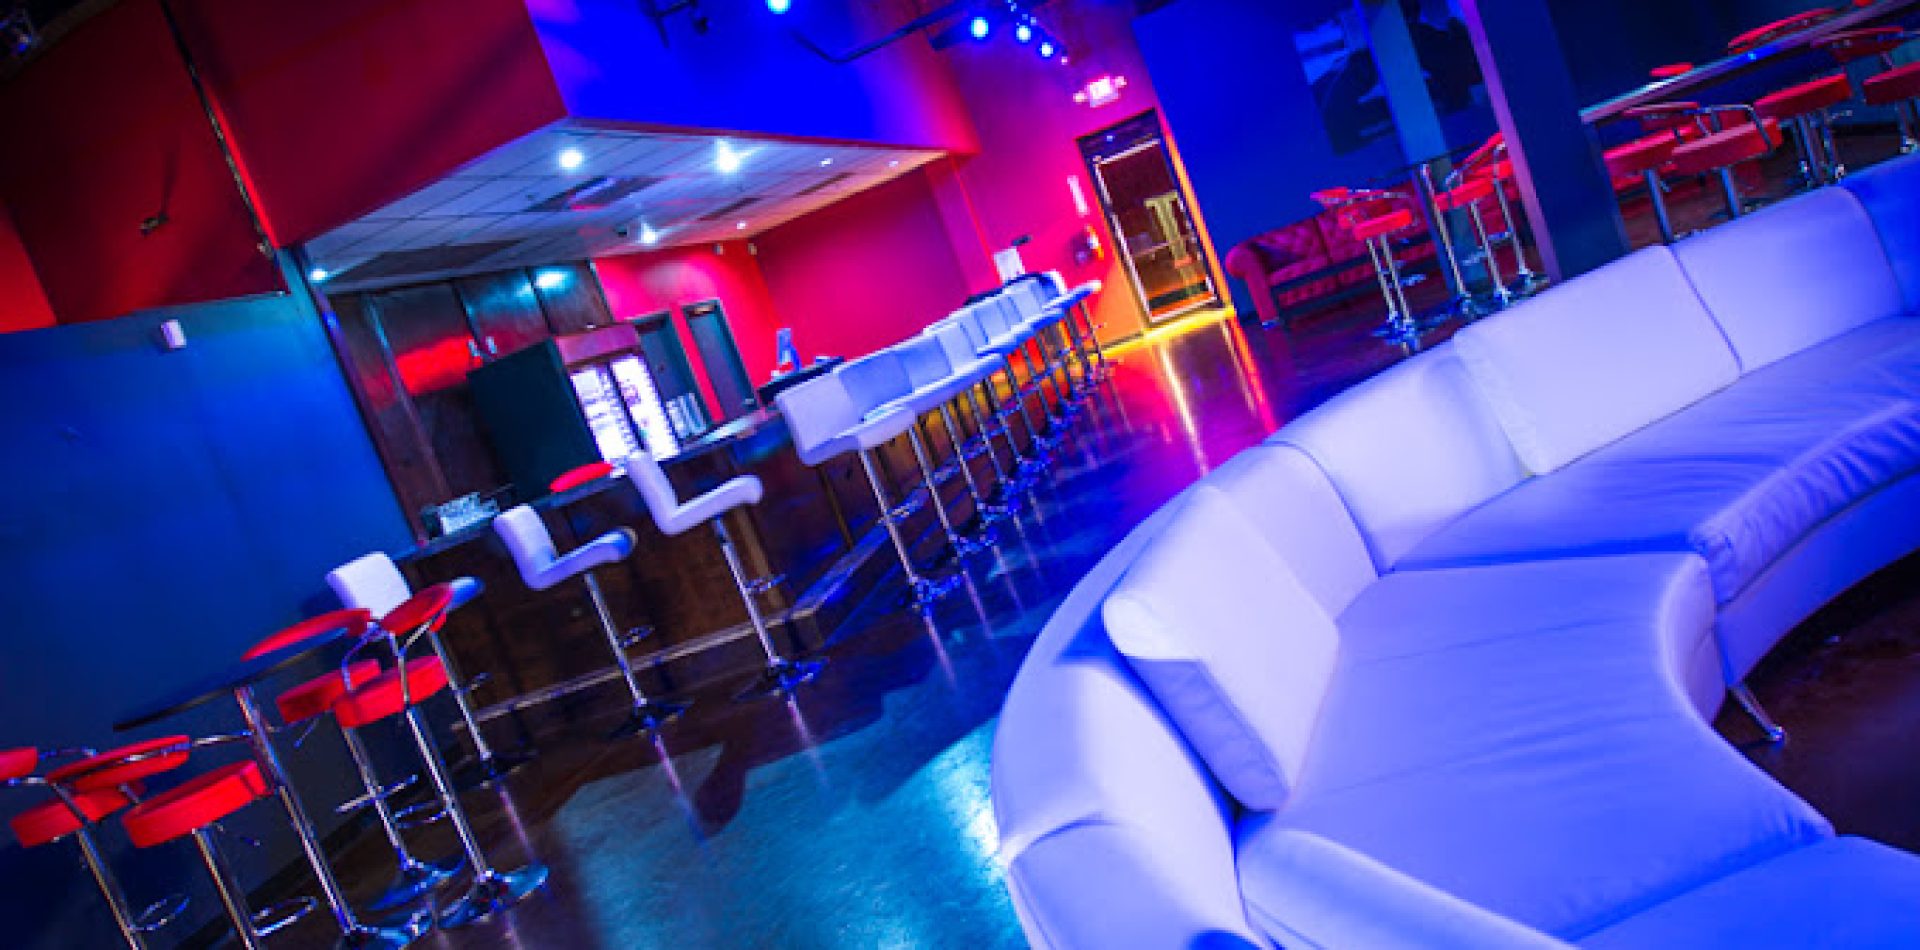 Upscale Clubs in Houston